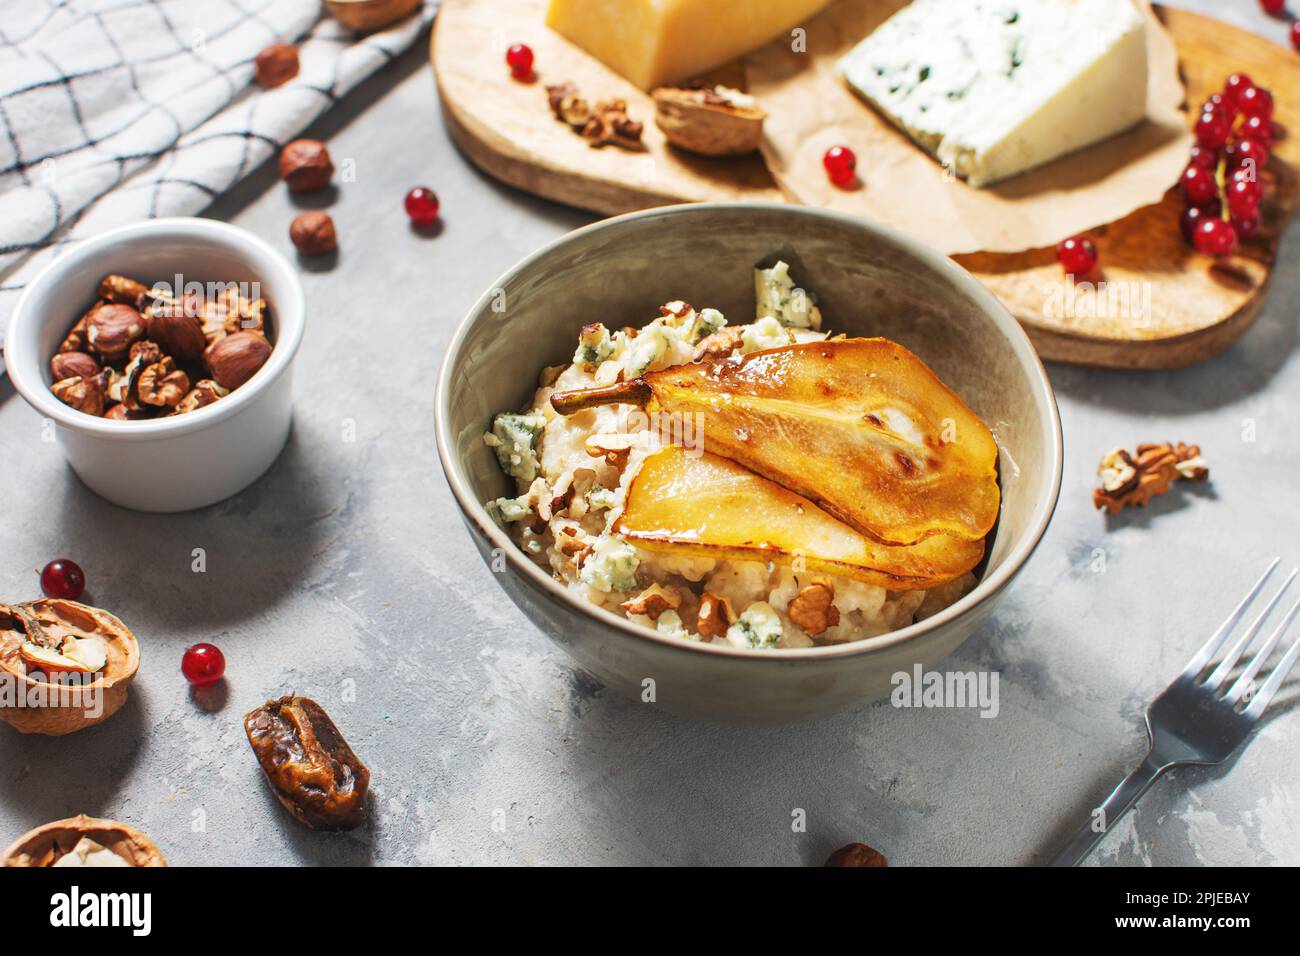 Pear and gorgonzola oatmeal with walnuts on concrete table. Stock Photo